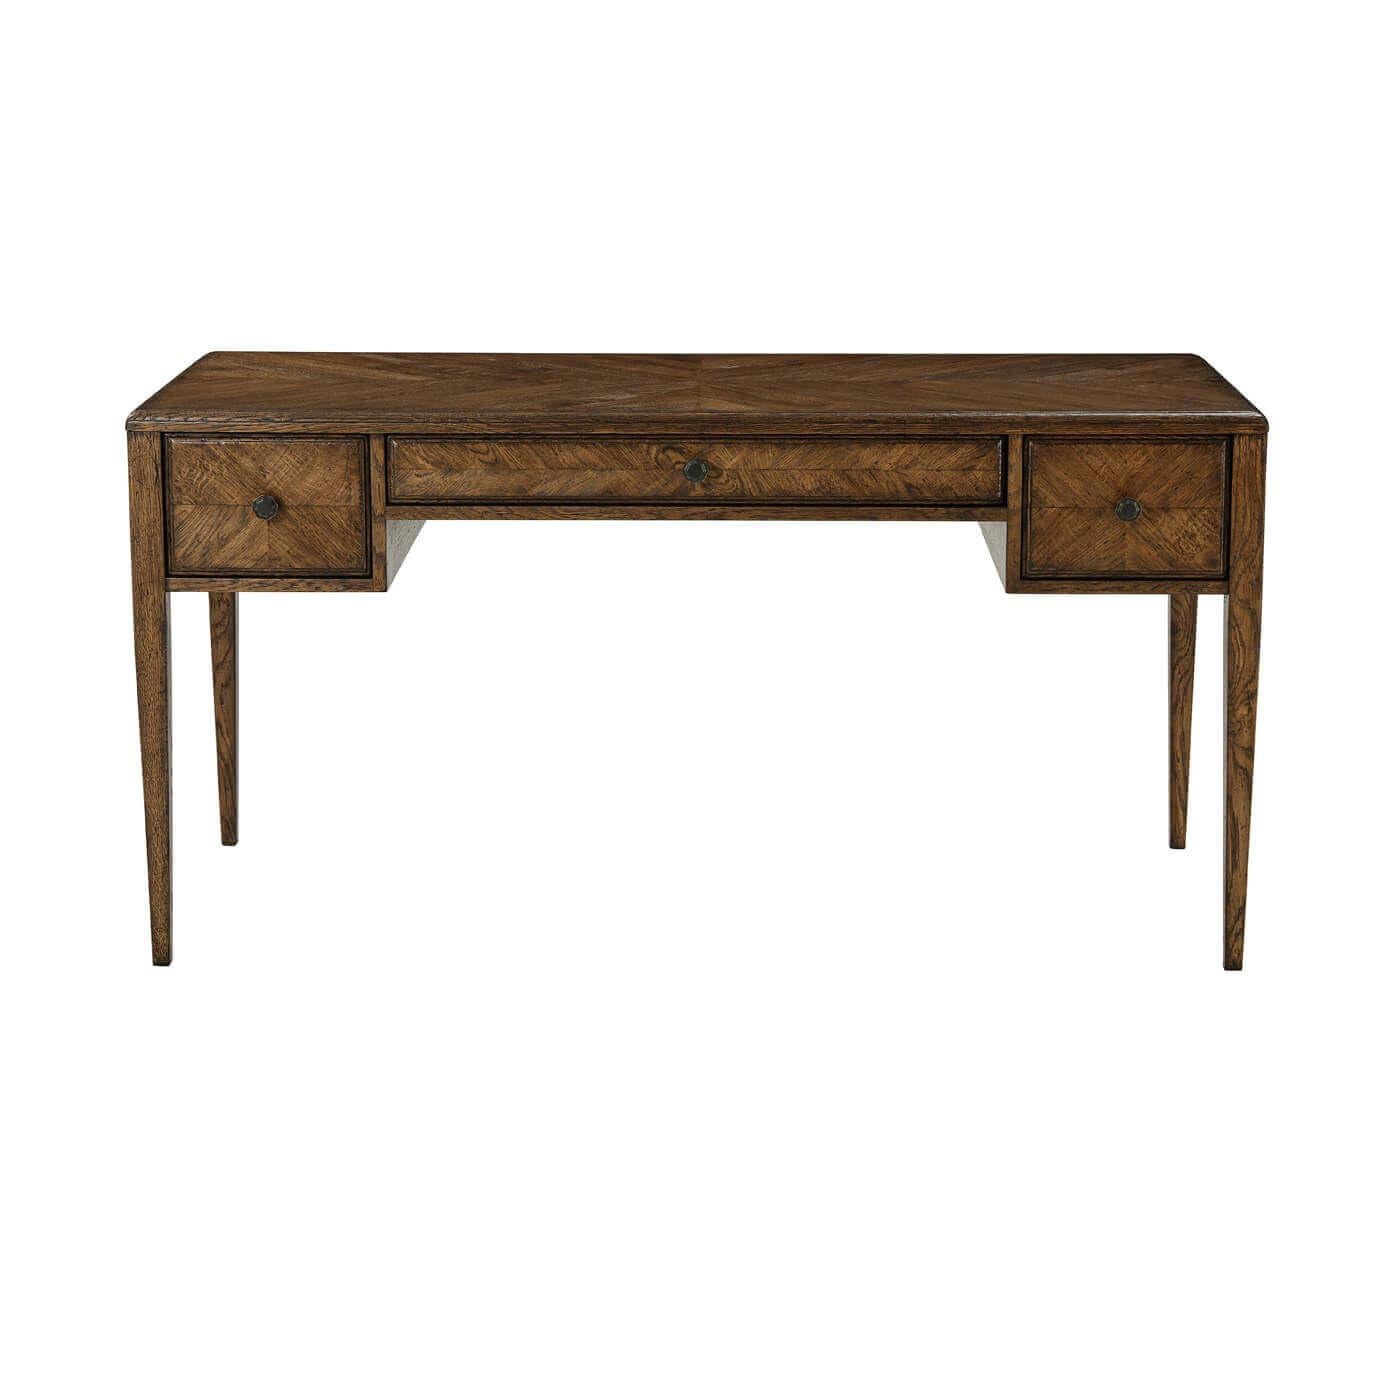 Italian NeoClassic Oak Parquetry Desk In New Condition For Sale In Westwood, NJ